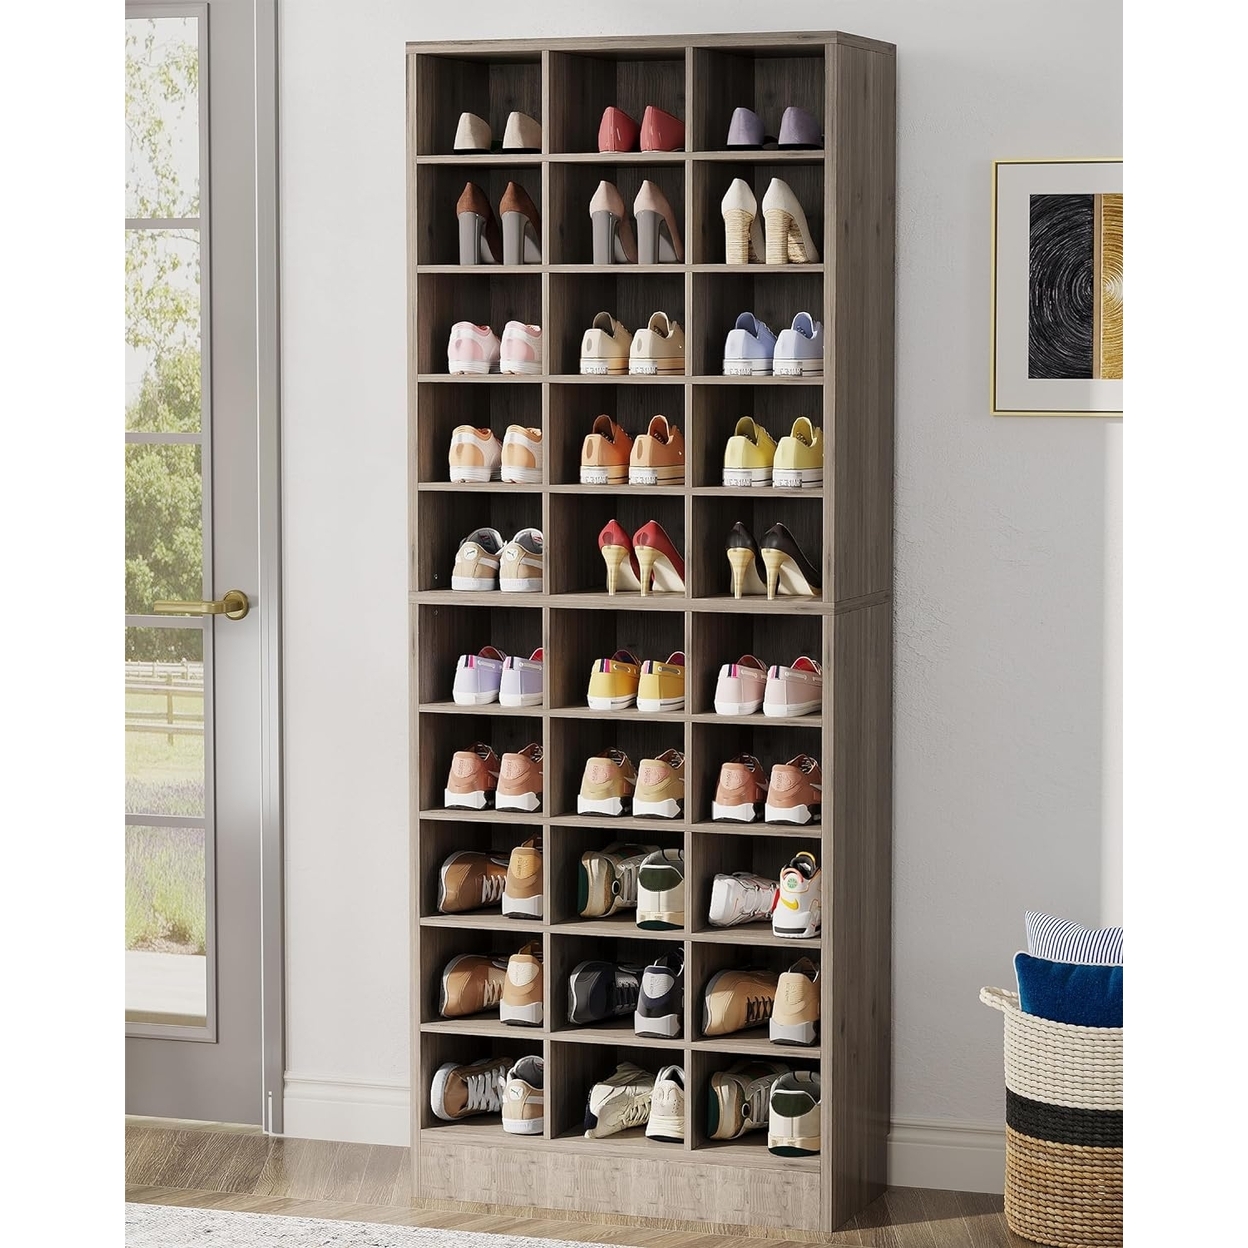 Tribesigns 10-Tier Shoe Storage Cabinet, Wooden Shoe Rack With 30 Cubbies, Freestanding Tall Entryway Shoe Organizer - Gray